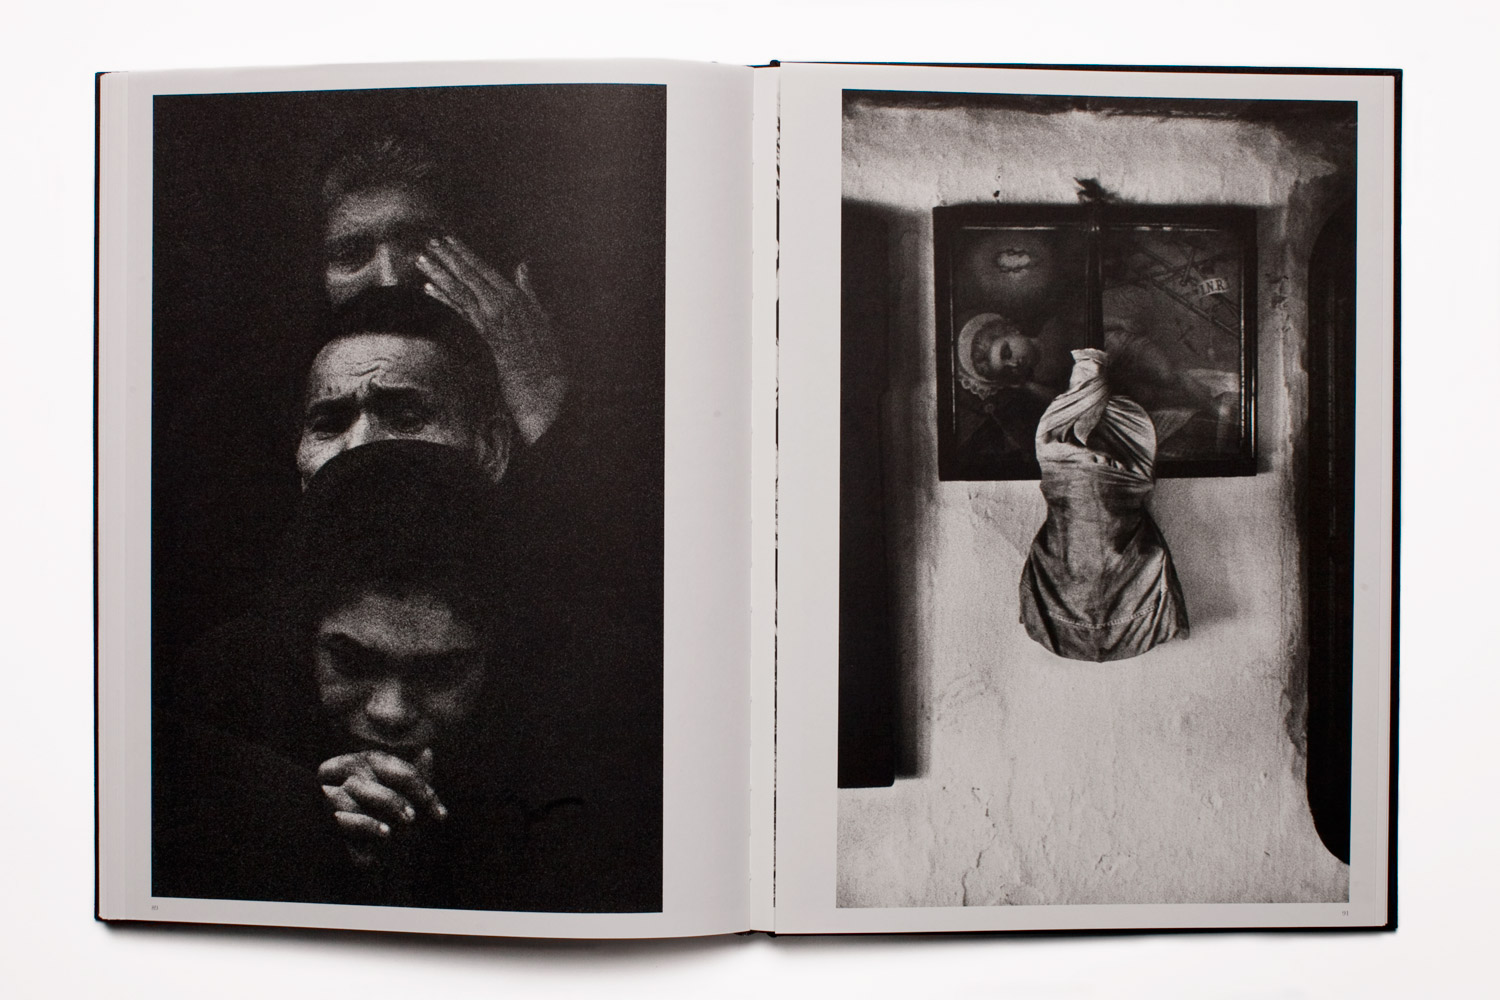 Josef Koudelka's newly published maquette features a completely different sequence than the 1975 edition. It is lavishly printed in a unique quadratone mix by printer Gerhard Steidl.